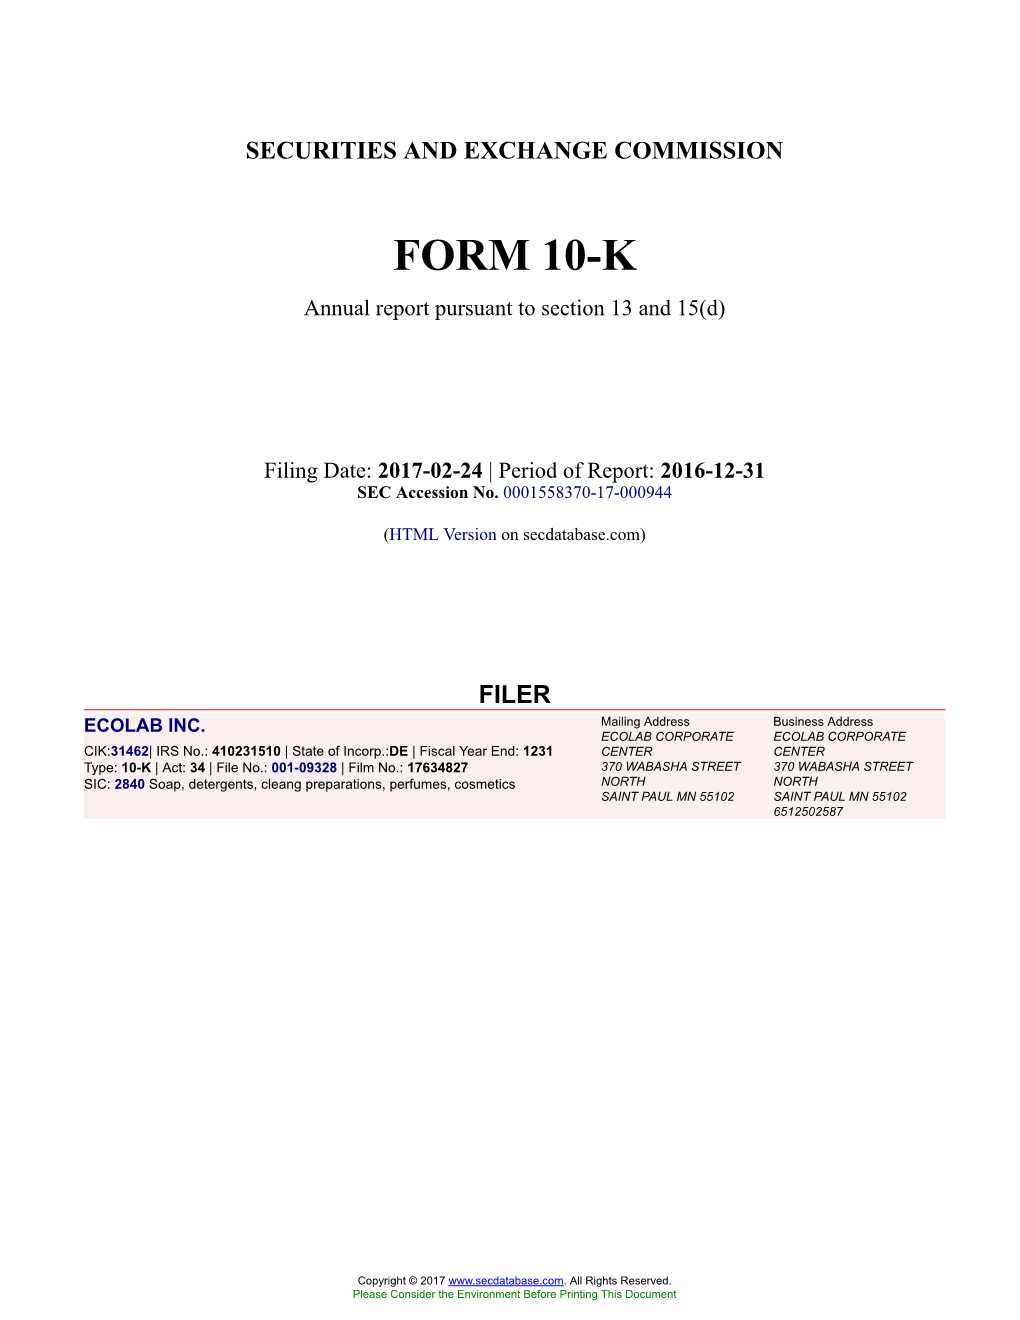 ECOLAB INC. Form 10-K Annual Report Filed 2017-02-24